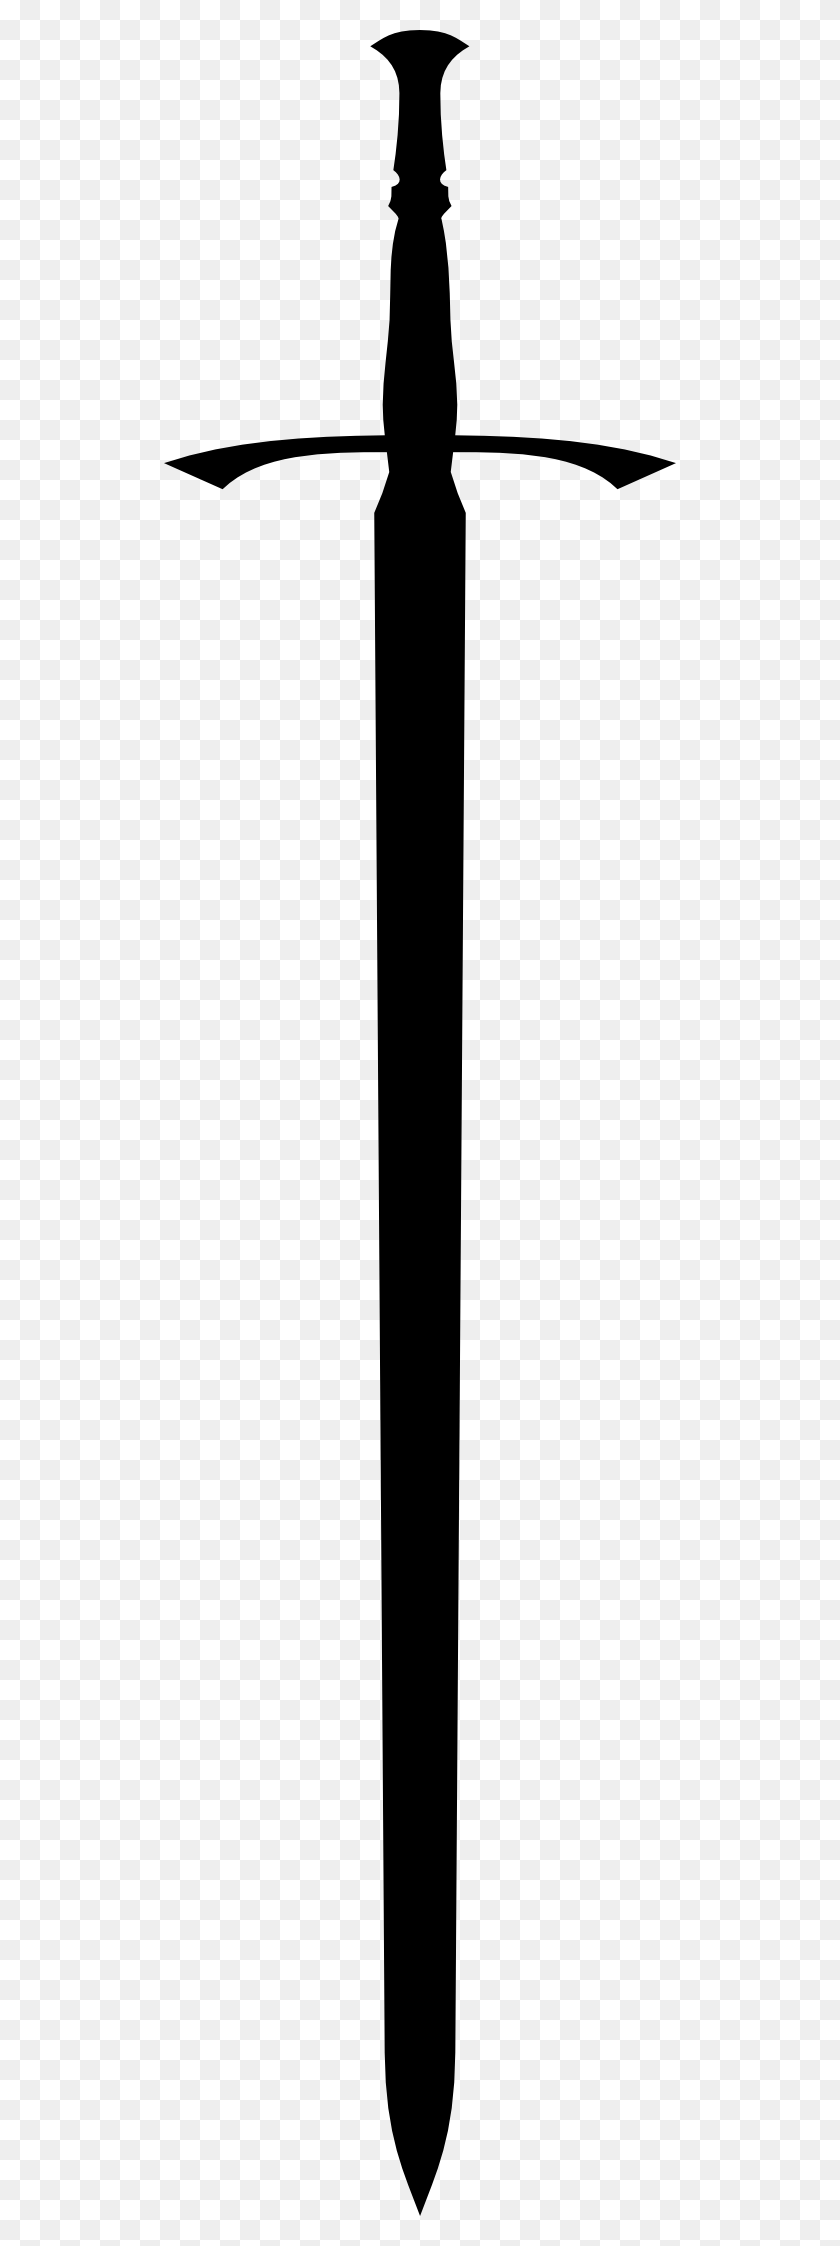 512x2186 Sword Png Black And White Transparent Sword Black And White - Sword Vector PNG